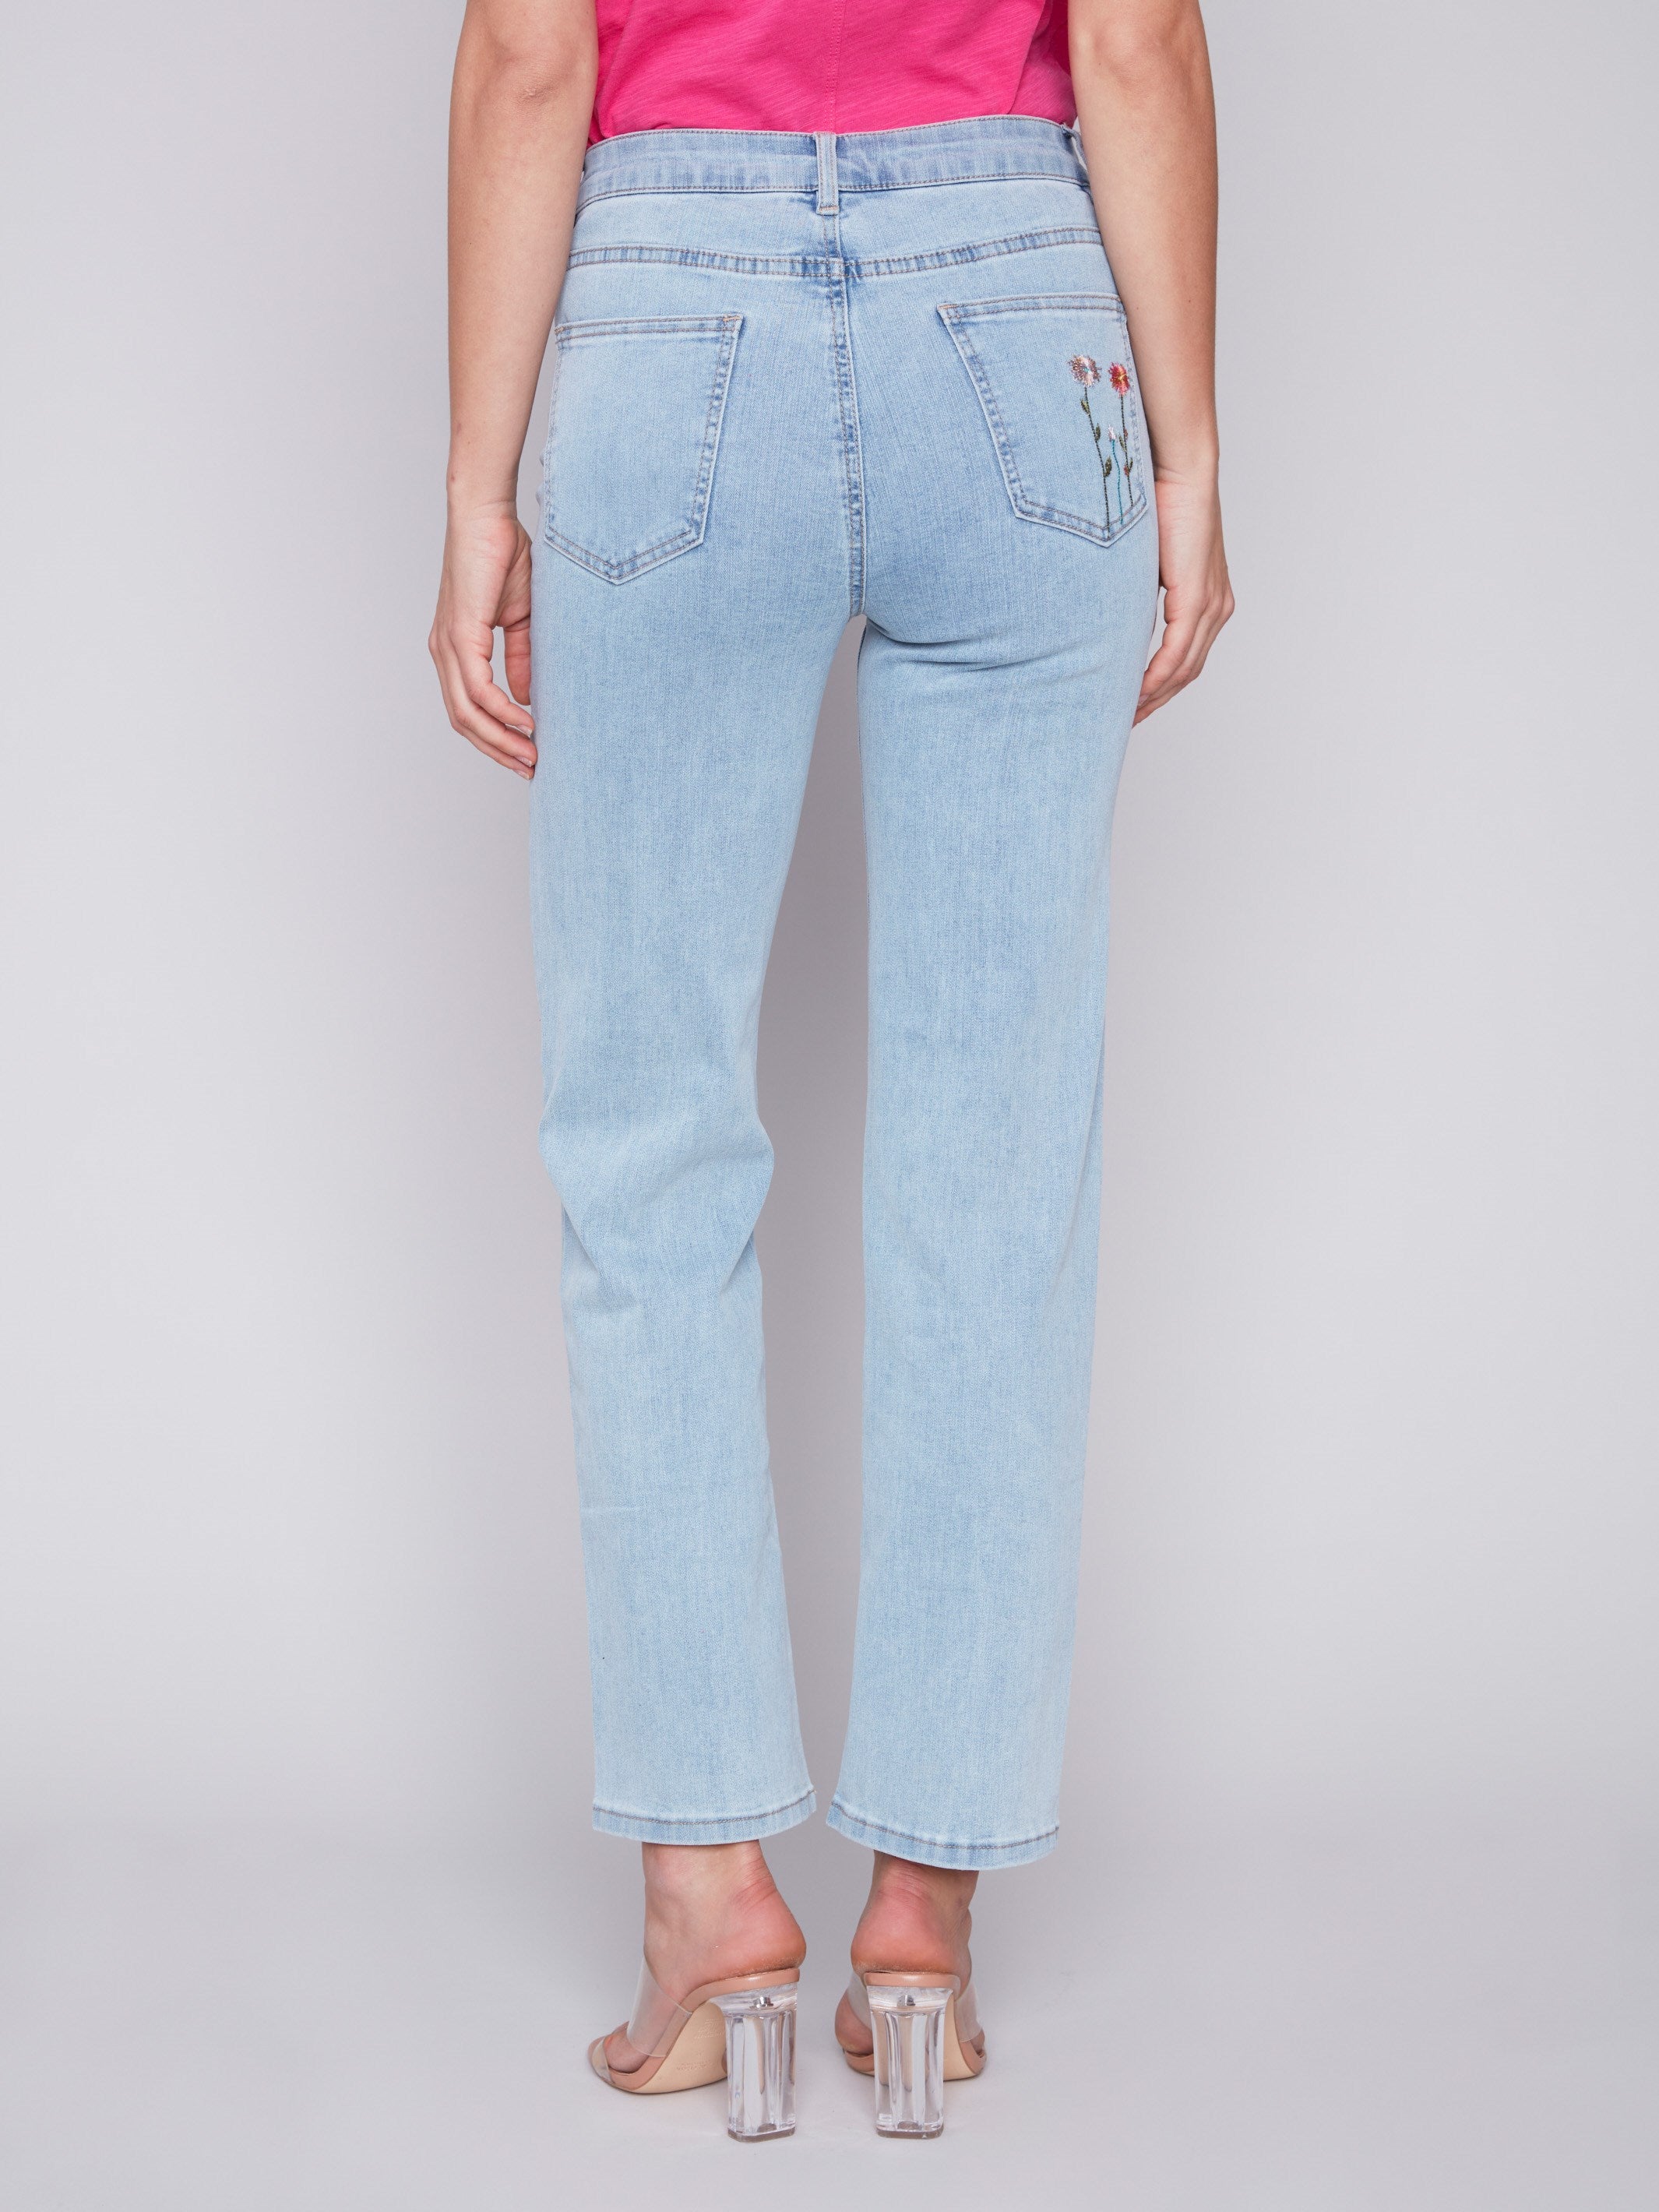 Charlie B Floral Embroidered Jeans - Bleach Blue - Image 3